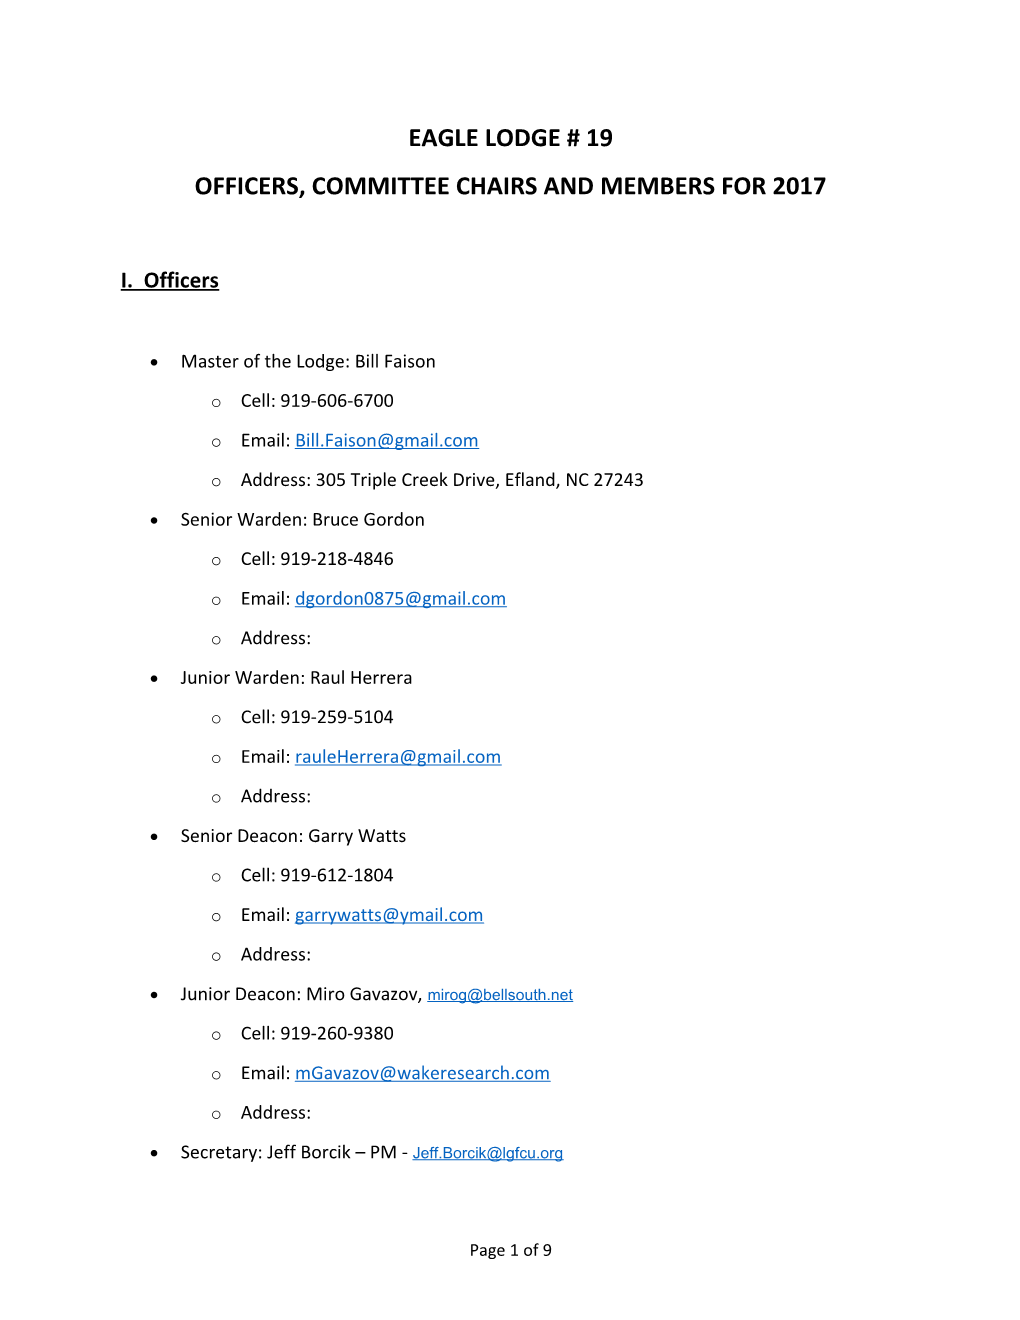 Officers,Committee Chairs and Members for 2017